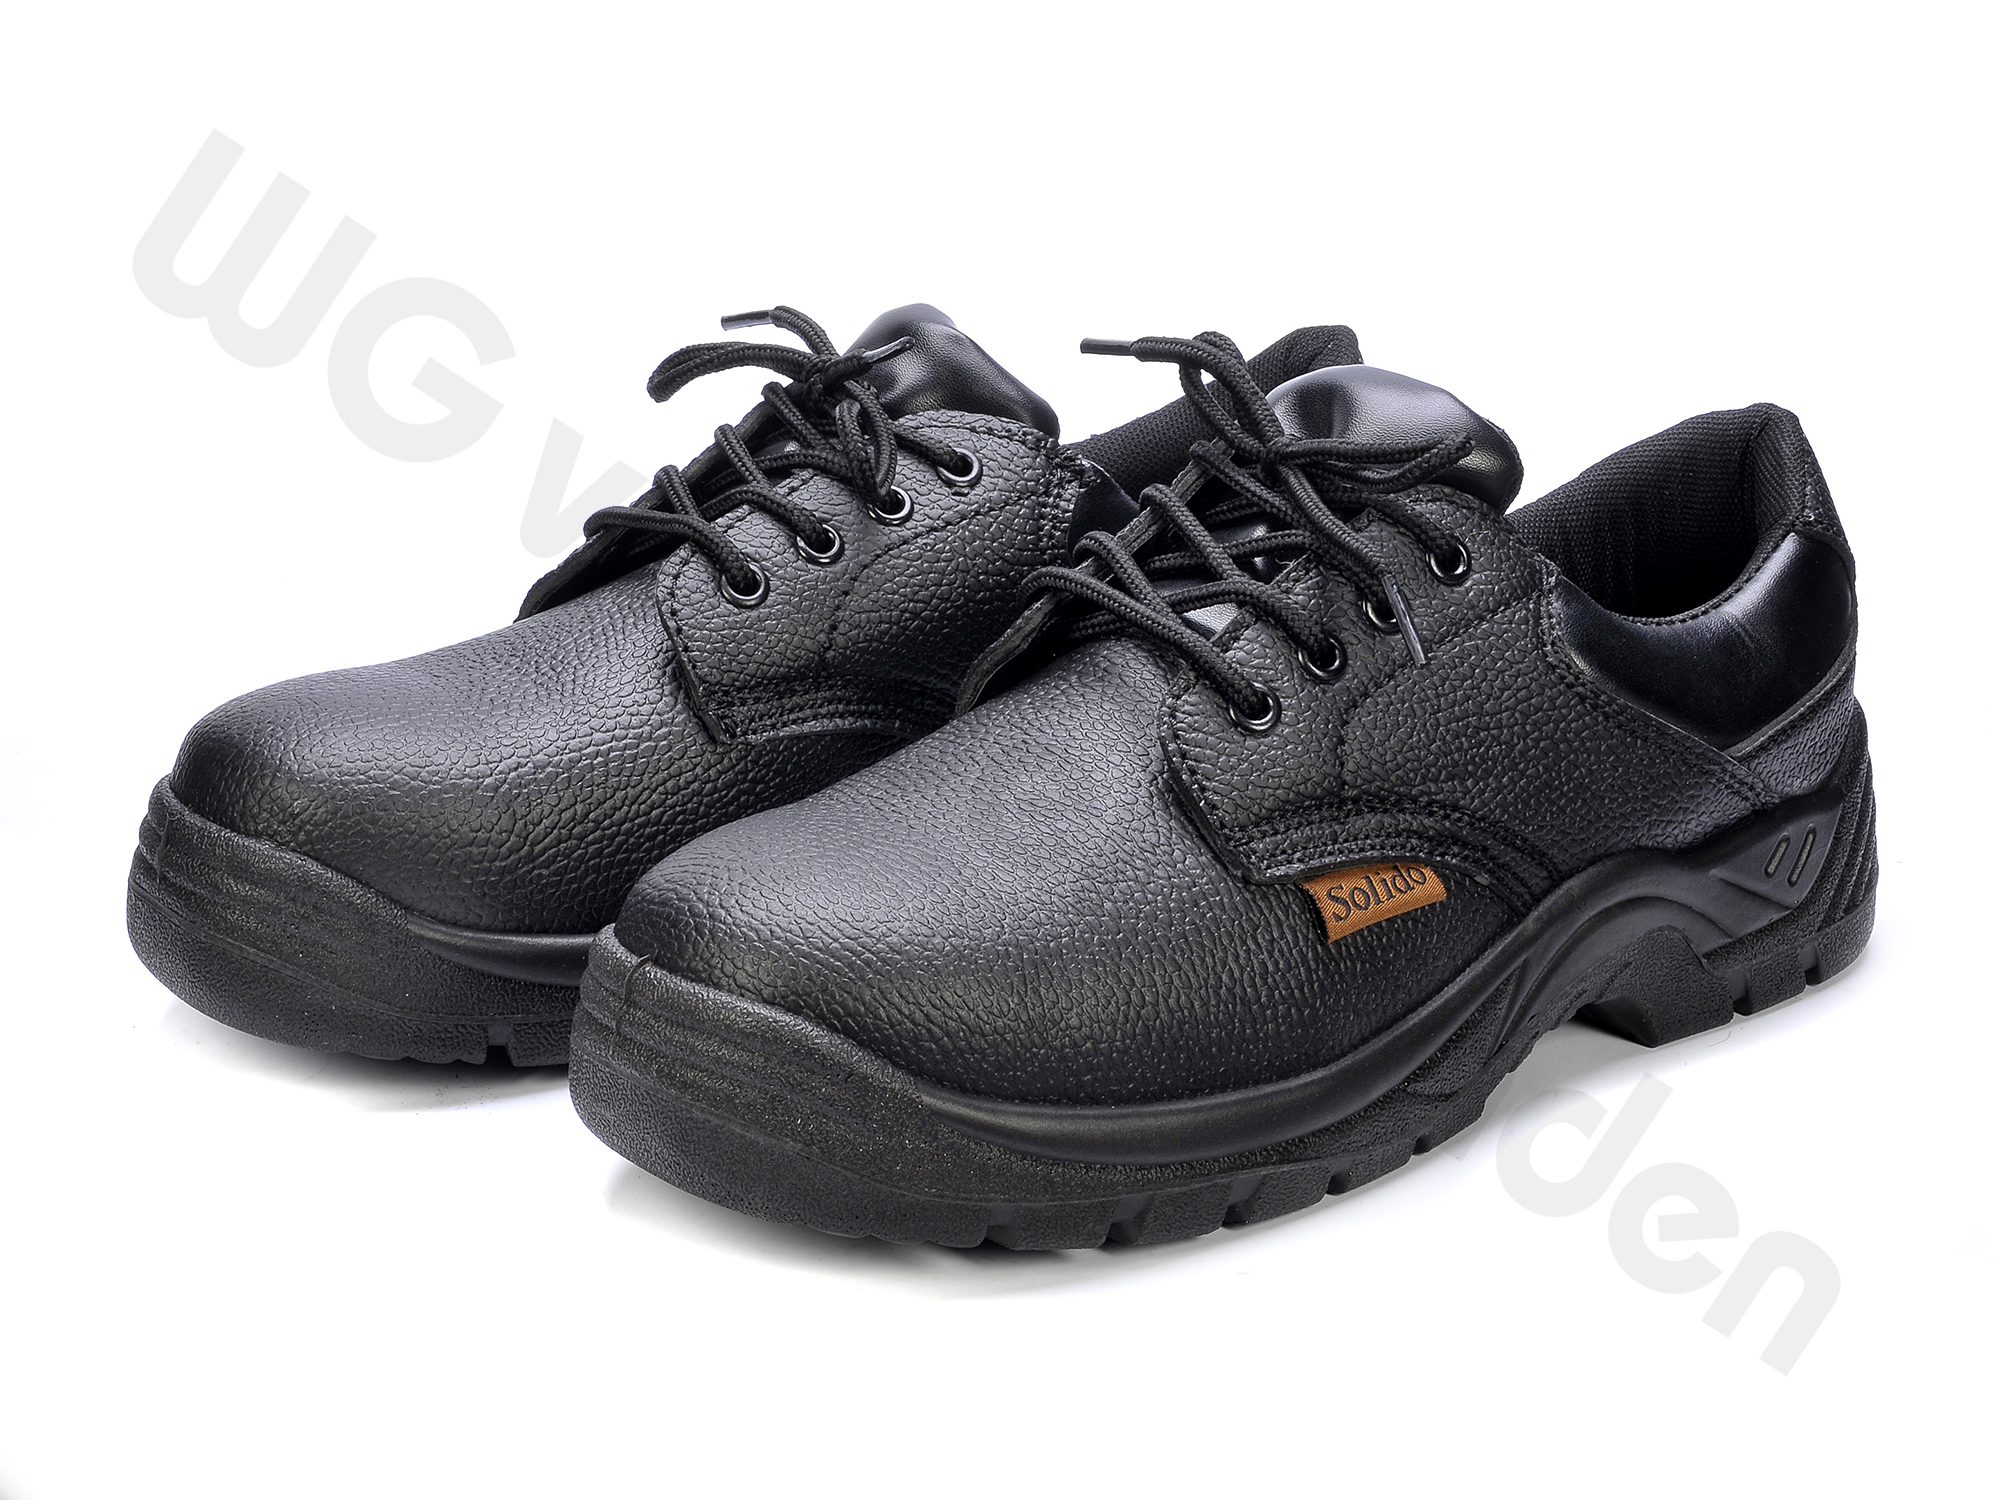 880601 SHOES SAFETY S1 WITH STEEL TOE SIZE 38 / 25CM CE